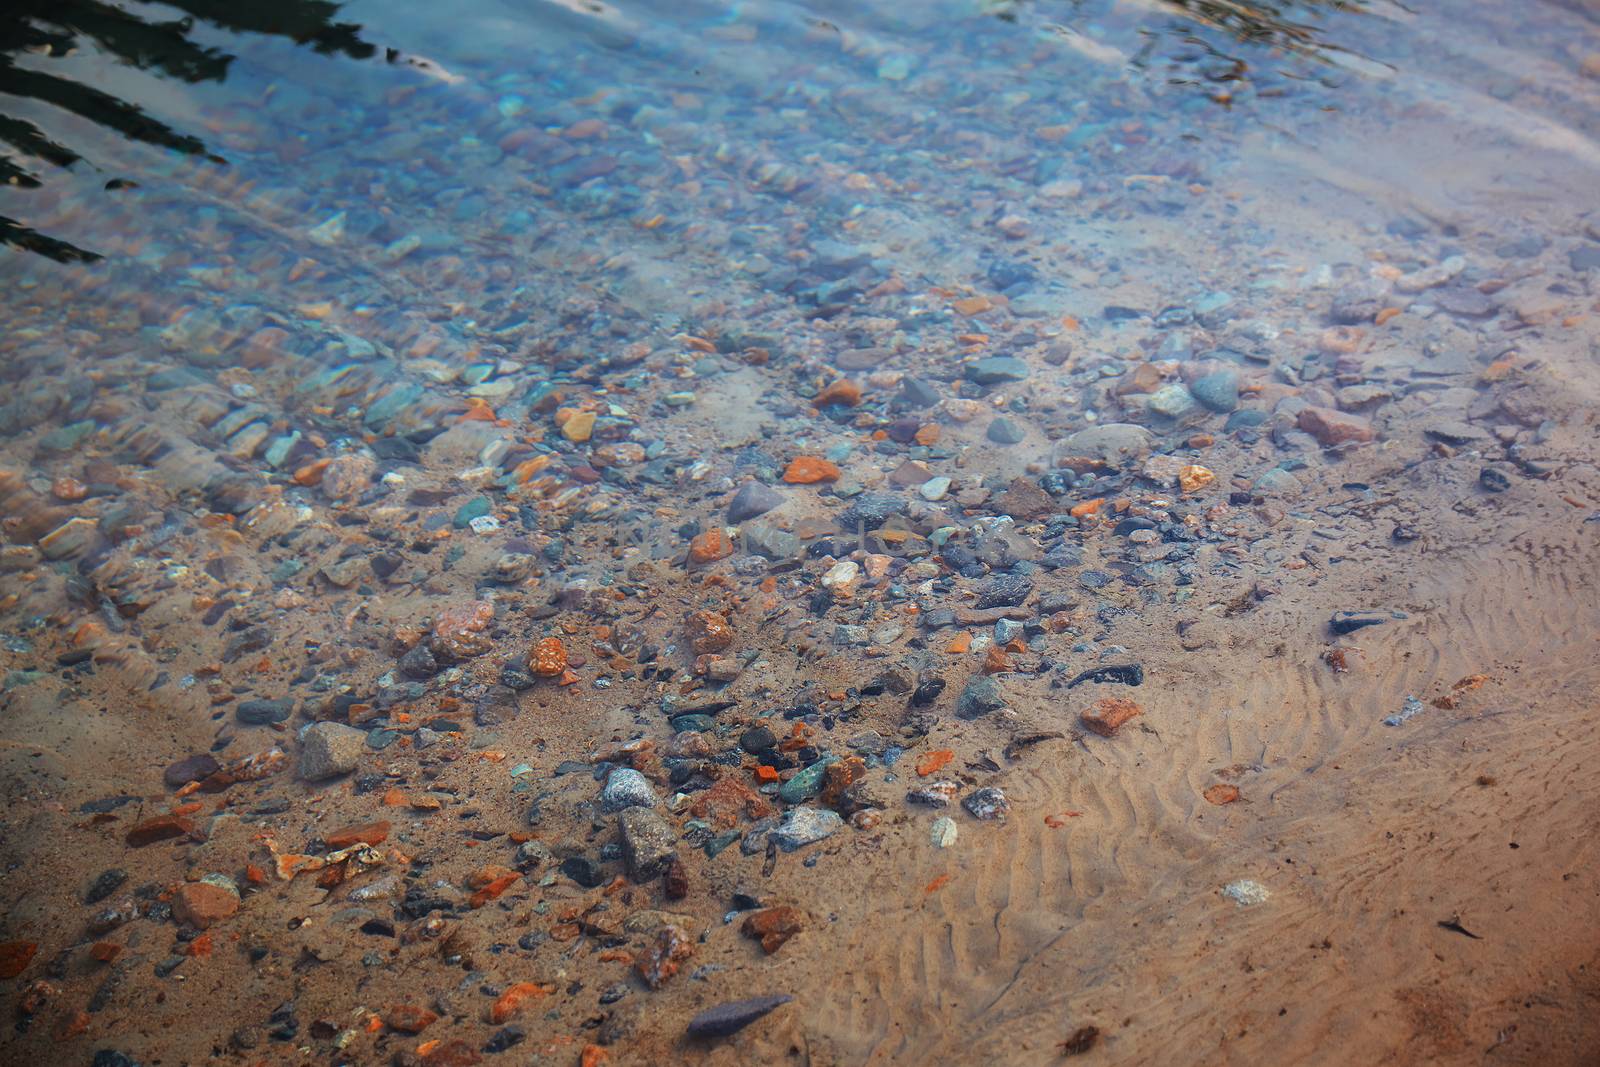 Underwater pebbles in the river. Close-up photo